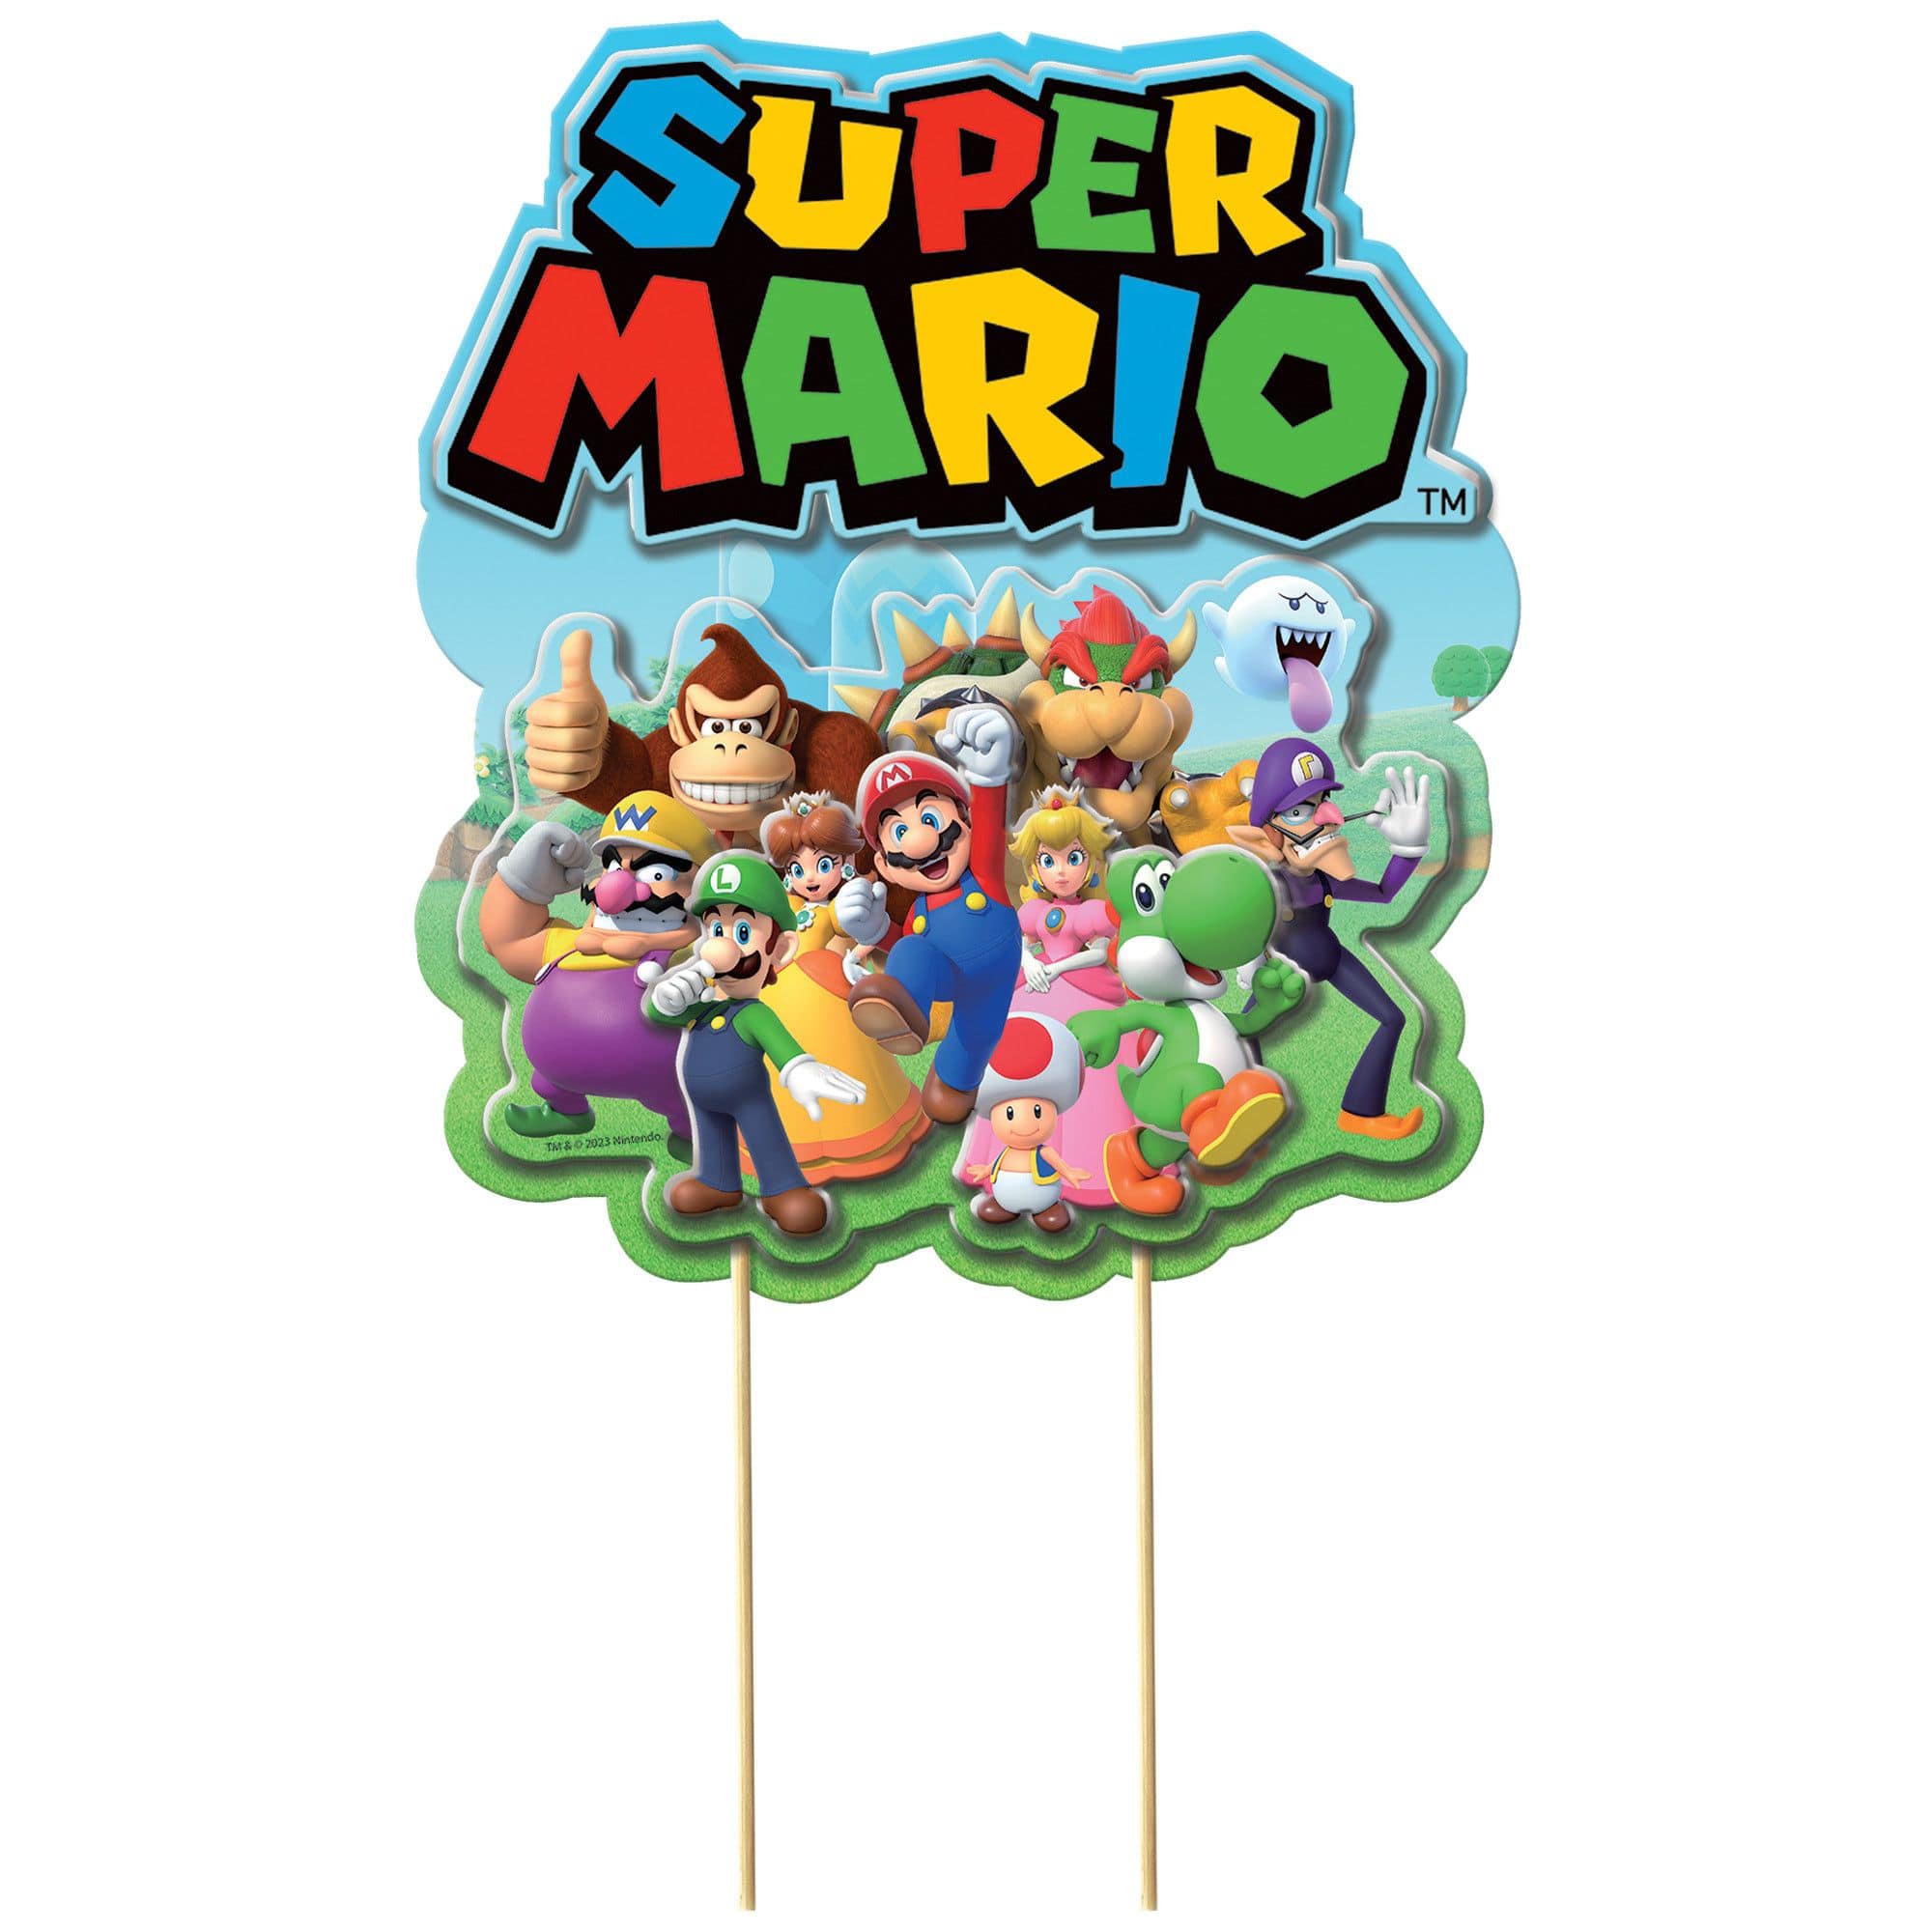 https://media-www.canadiantire.ca/product/automotive/party-city-everyday/party-city-kids-birthday-pinatas/8534610/super-mario-brothers-birthday-candle-91e892e0-5e8a-4b3f-a6d5-5b5054416dfd-jpgrendition.jpg